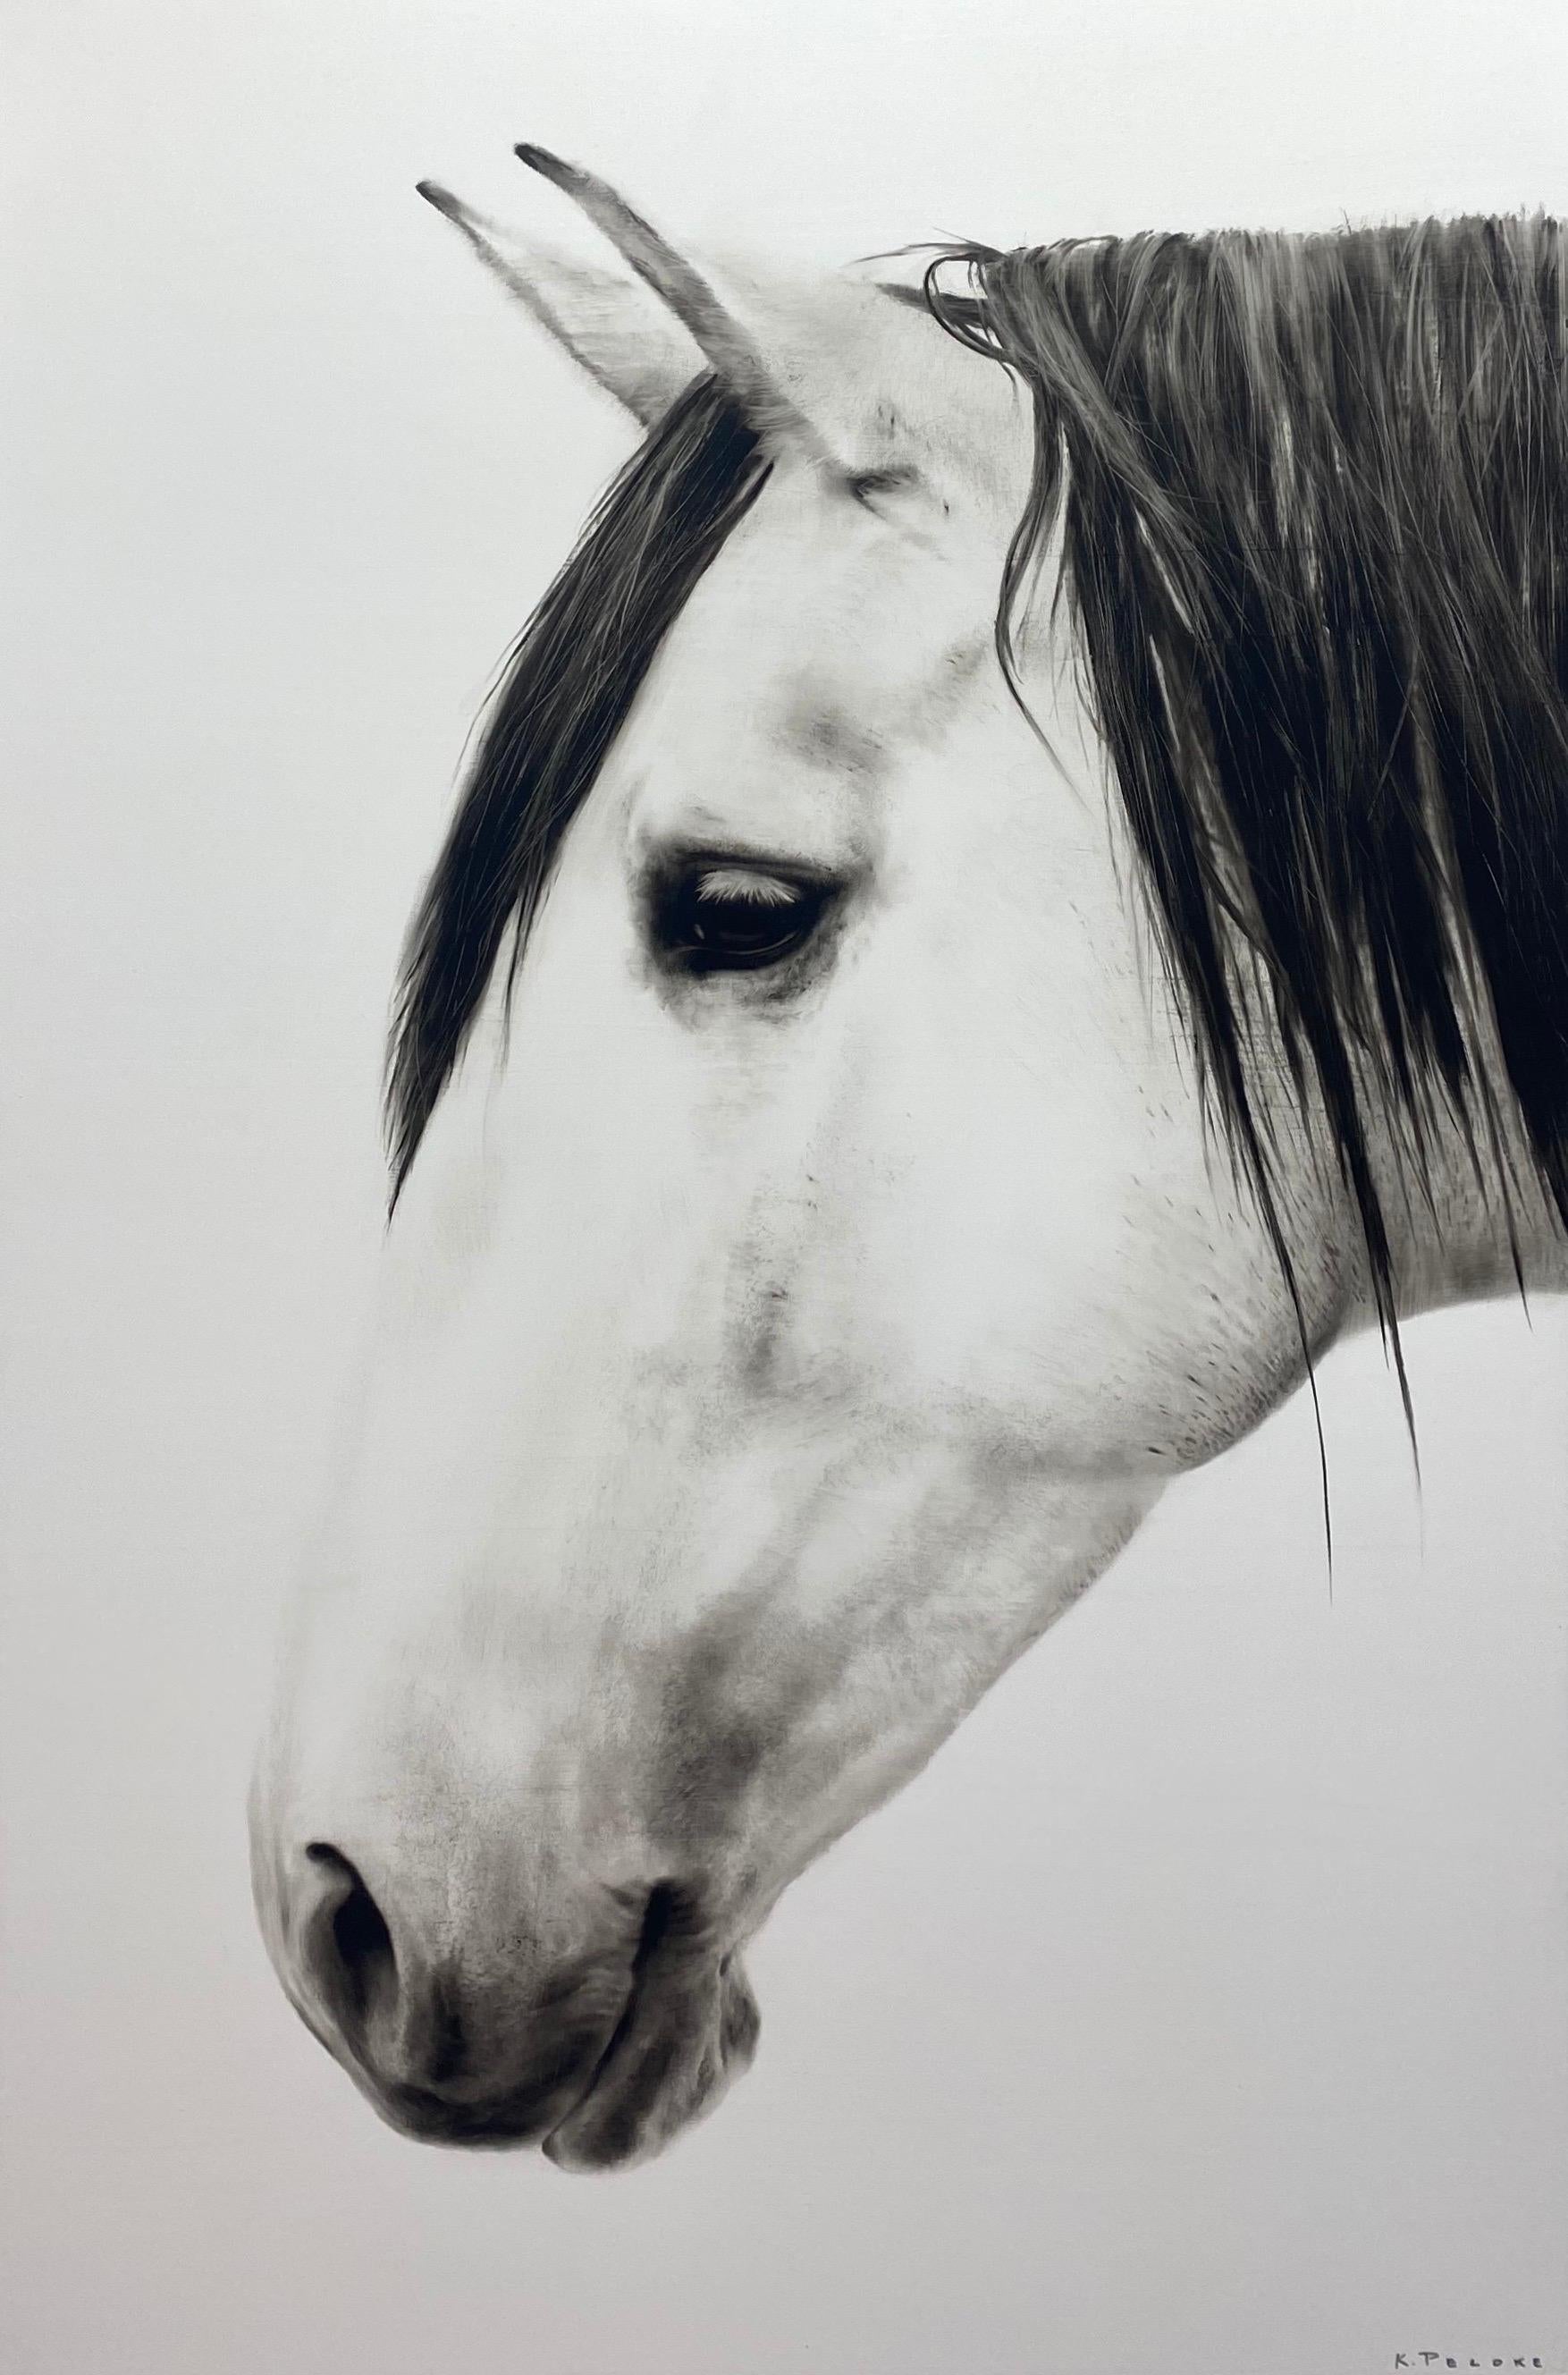 KENNETH PELOKE Animal Painting - "Destiny" black and white oil painting of a white horse's profile